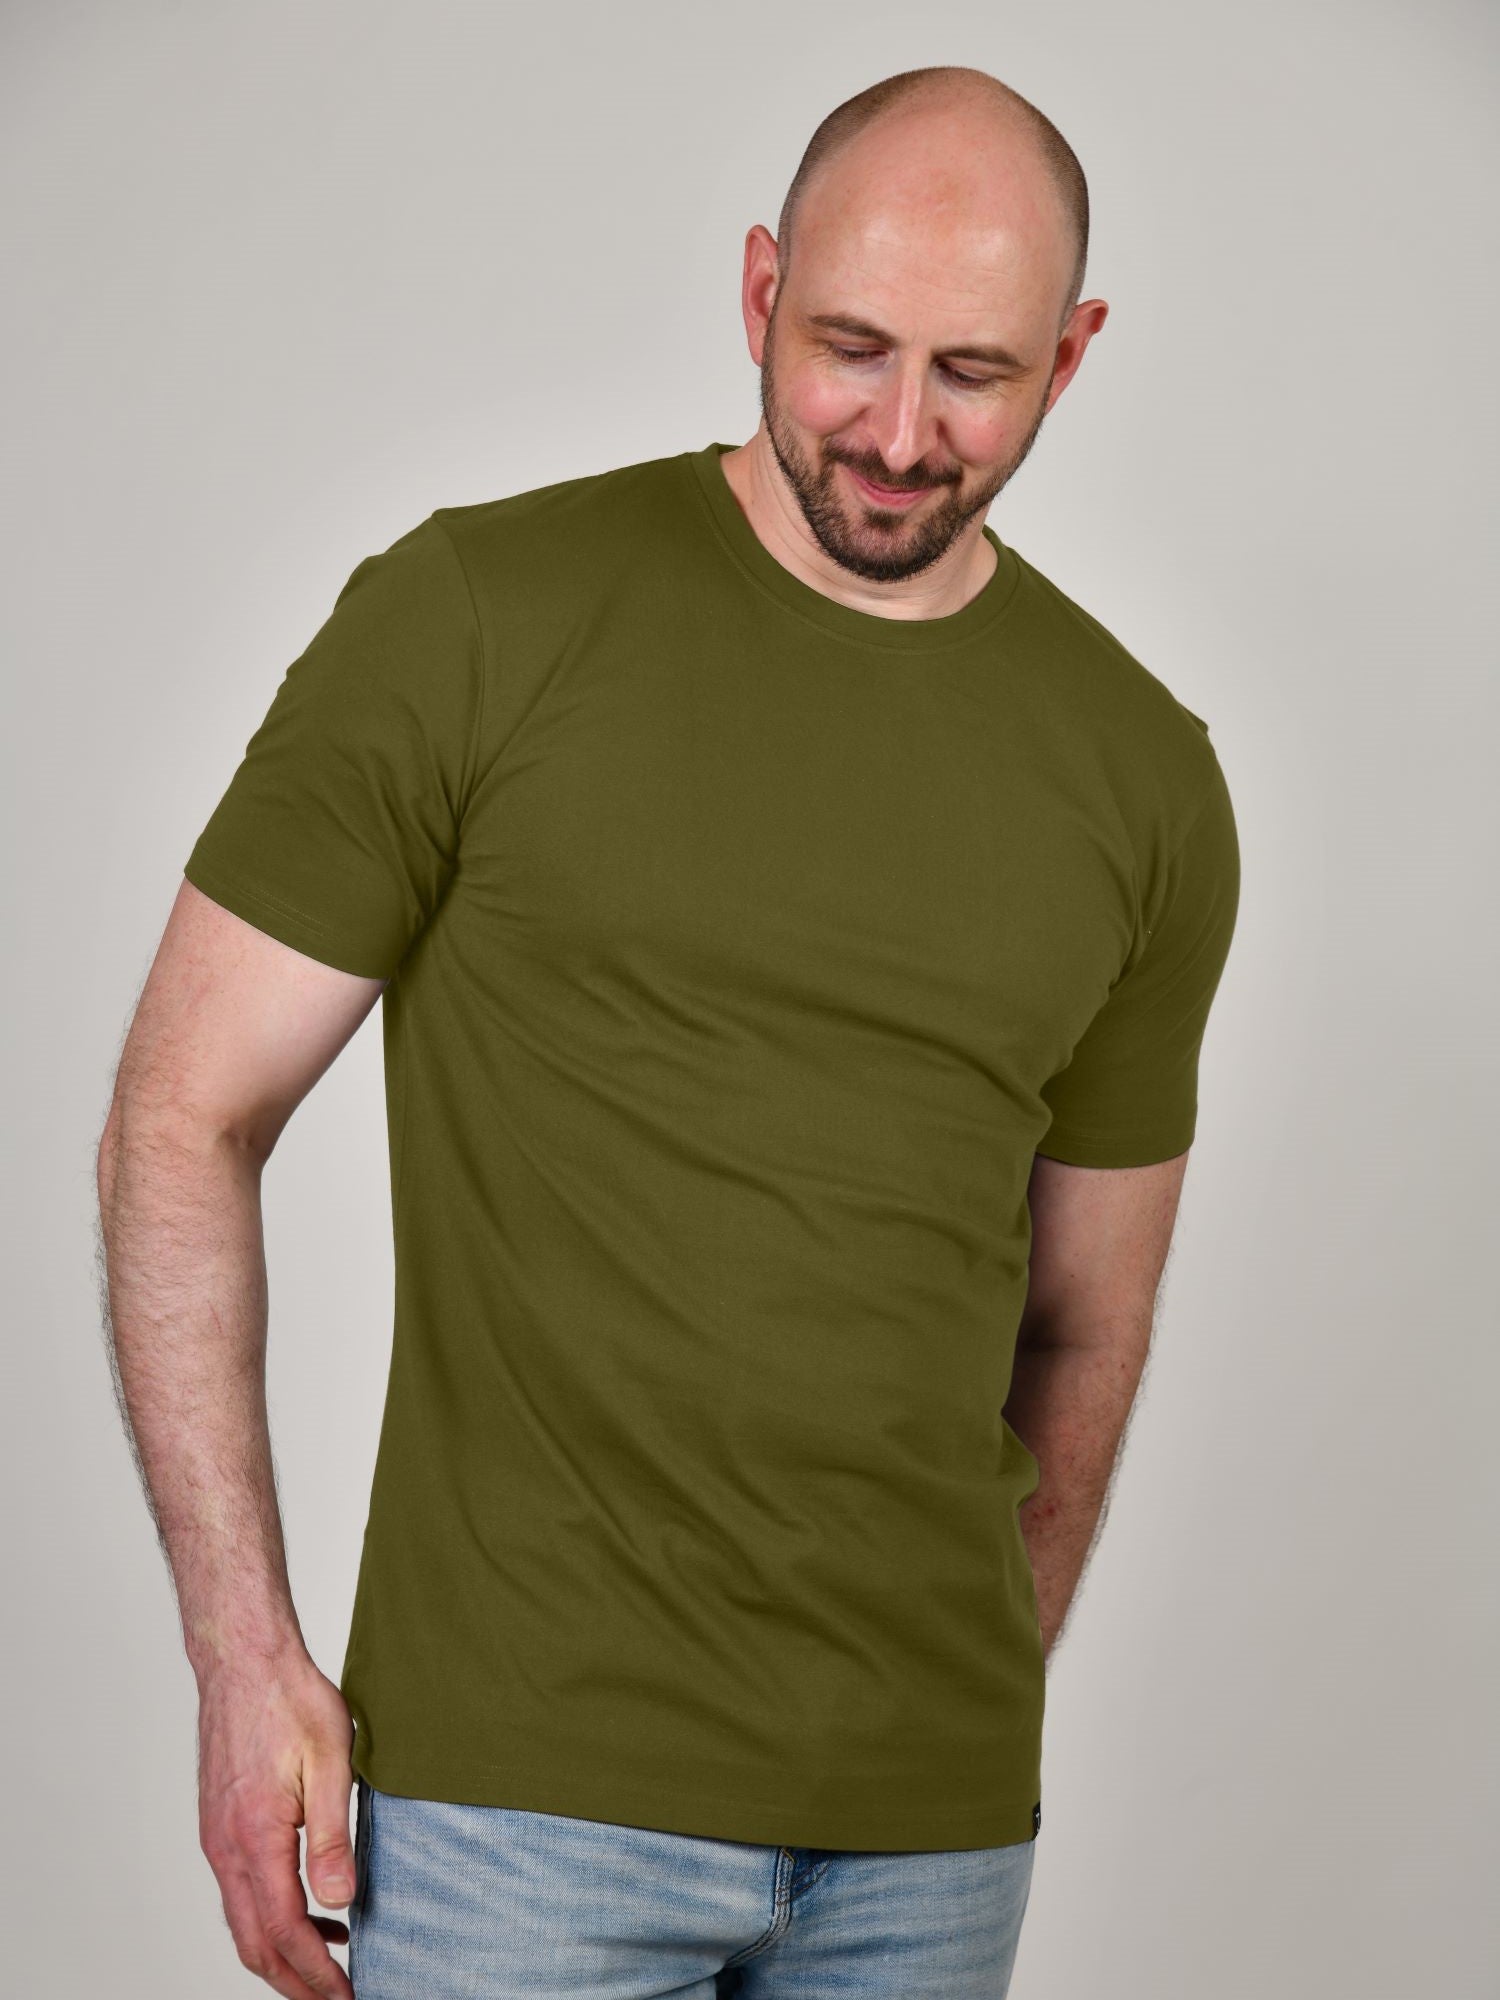 A tall and slim man in the studio standing in front of a light background. The model is wearing an extra long slim military green t-shirt in a size XL. The military green t-shirt features a 3" longer body, 100% organic cotton, and is soft & preshrunk. The military green t-shirt is ideal for tall slim men 6'2"+.